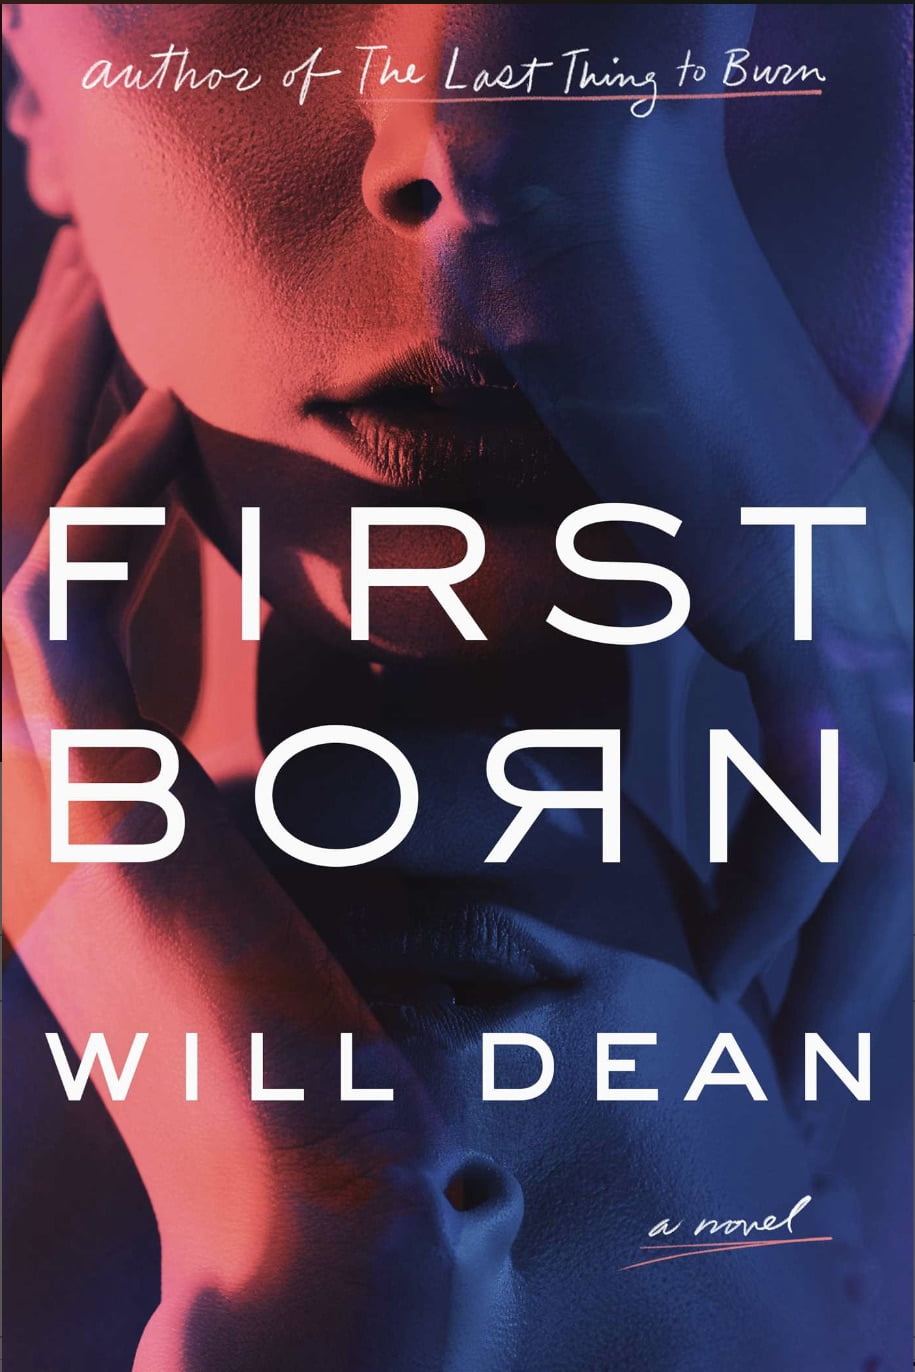 FIRST BORN BY WILL DEAN – BOOK REVIEW